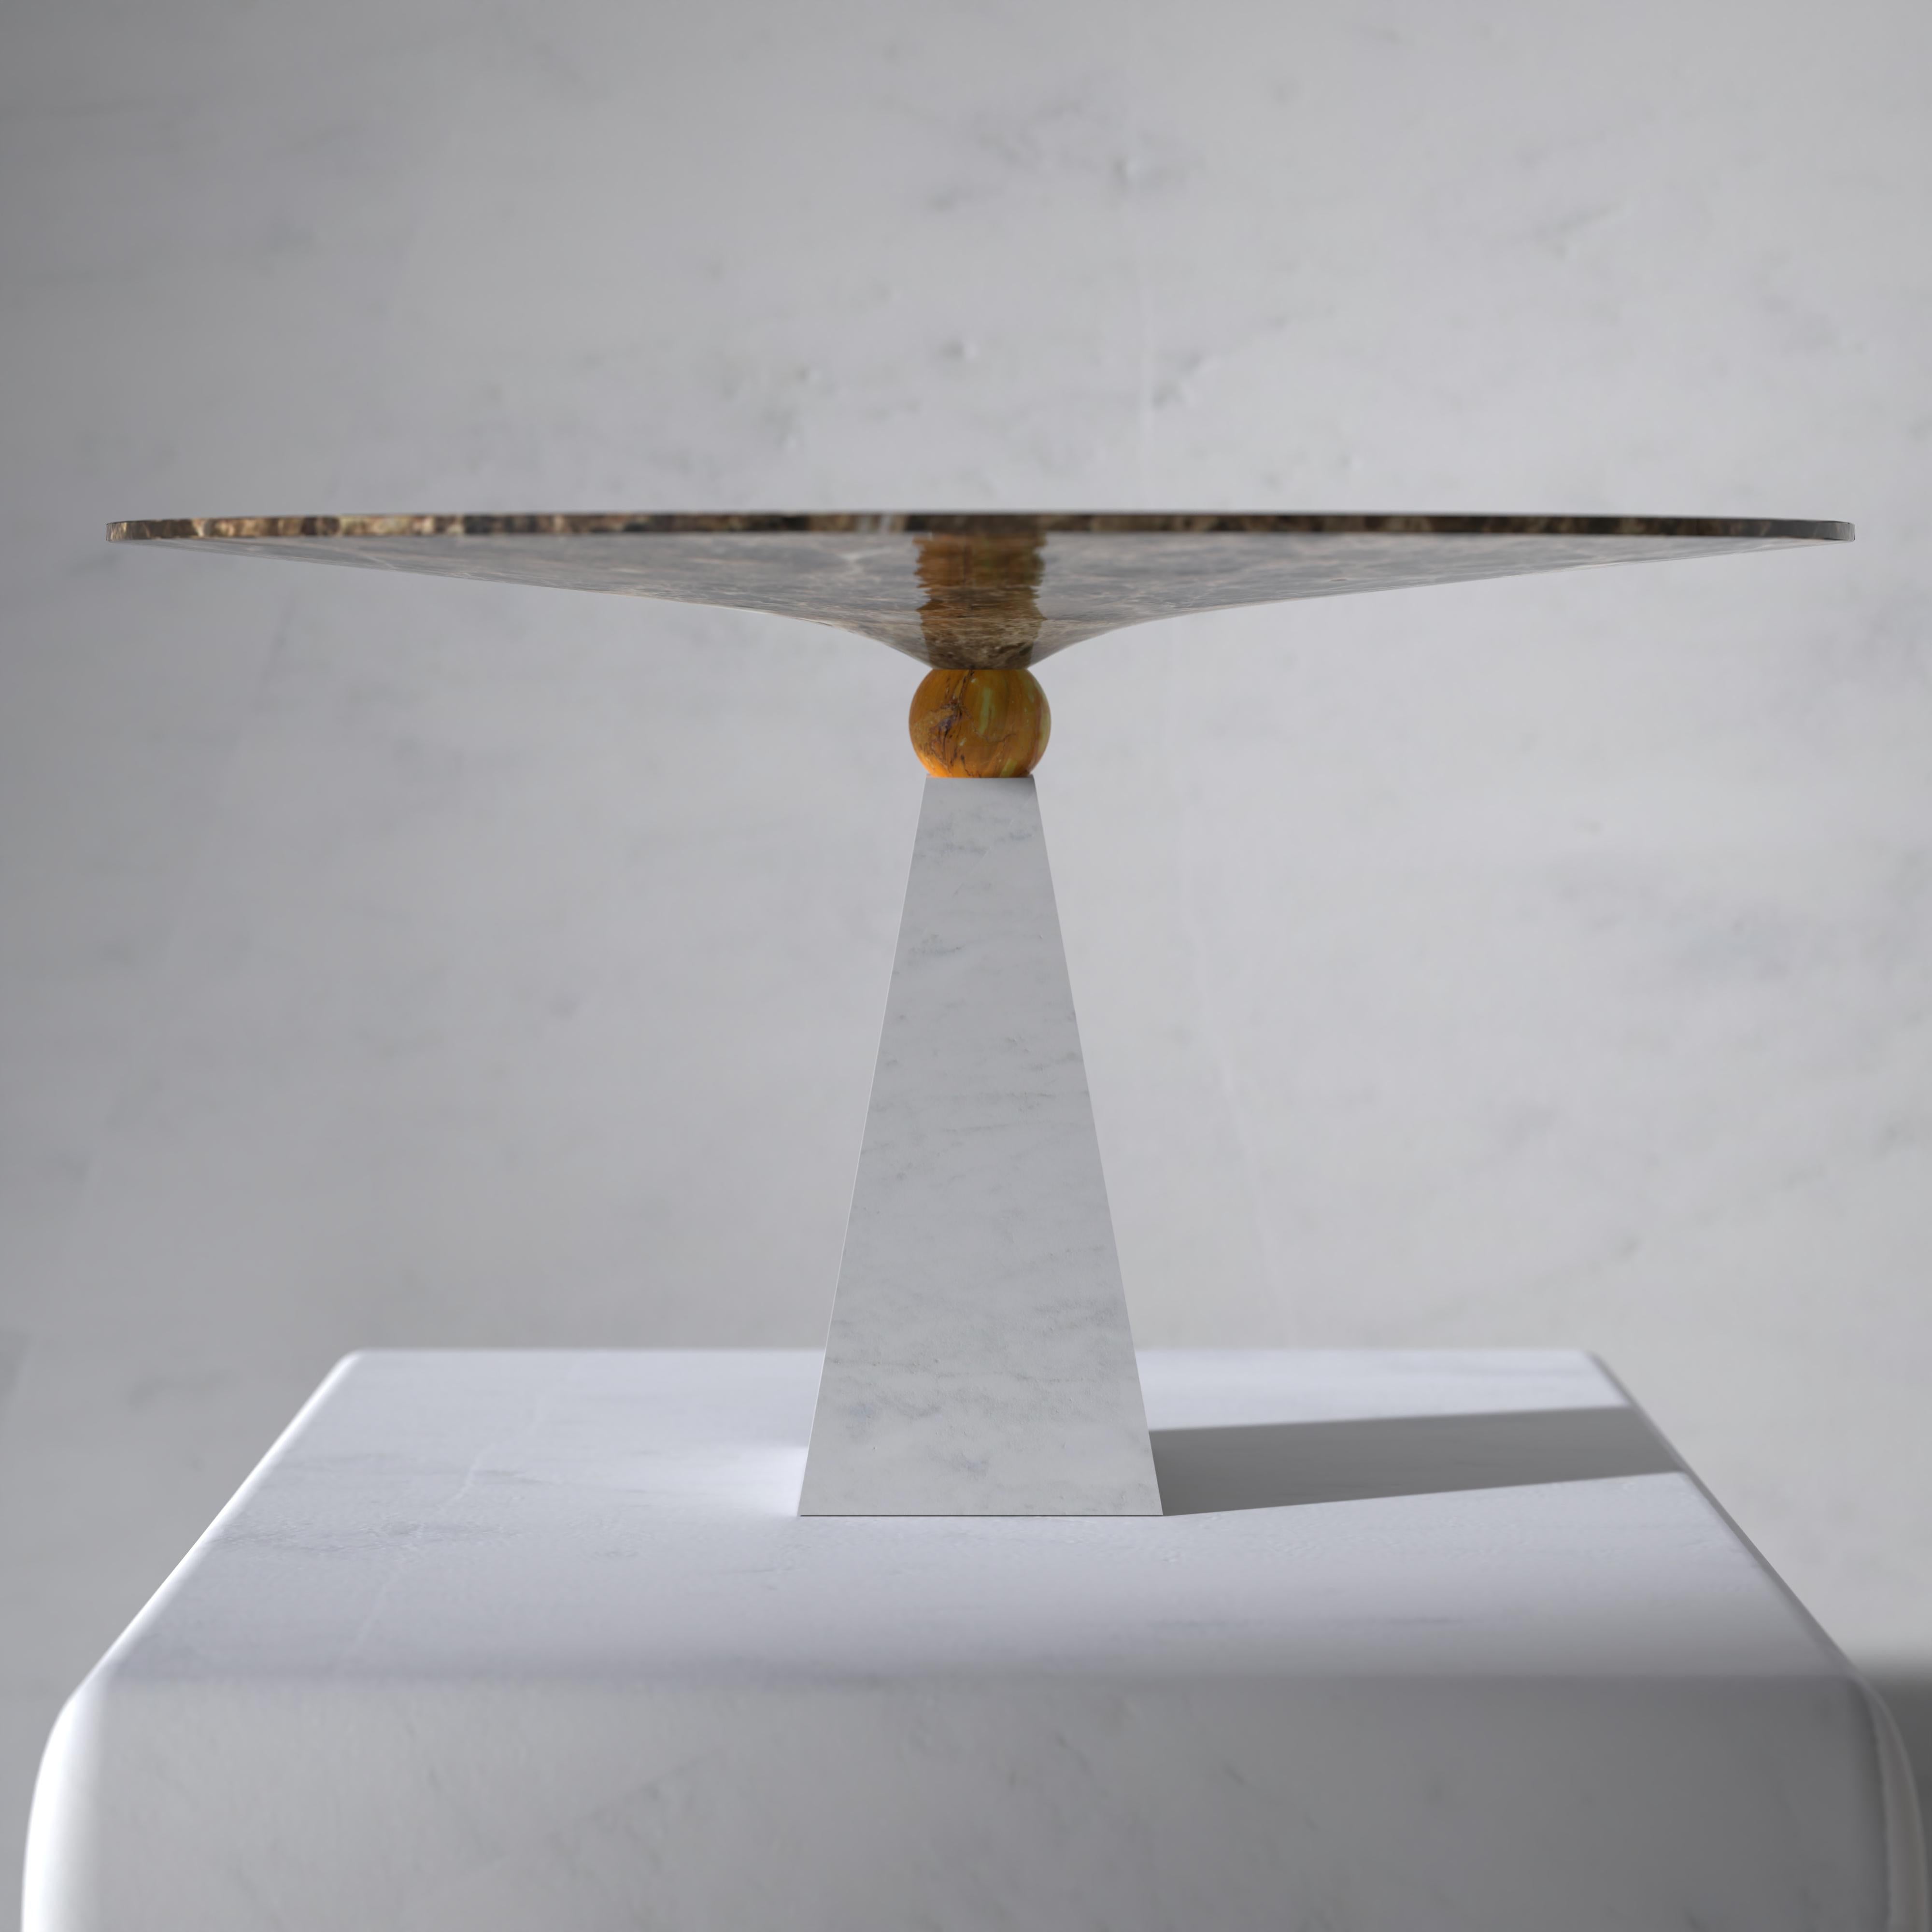 A hymn to grace and lightness, the Libra centerpiece is the ideal piece to add gravitas to your table. Designed and made entirely in Italy, this sophisticated collector's piece is a ceremony of marble, offered here in a triptych of colors: Giallo